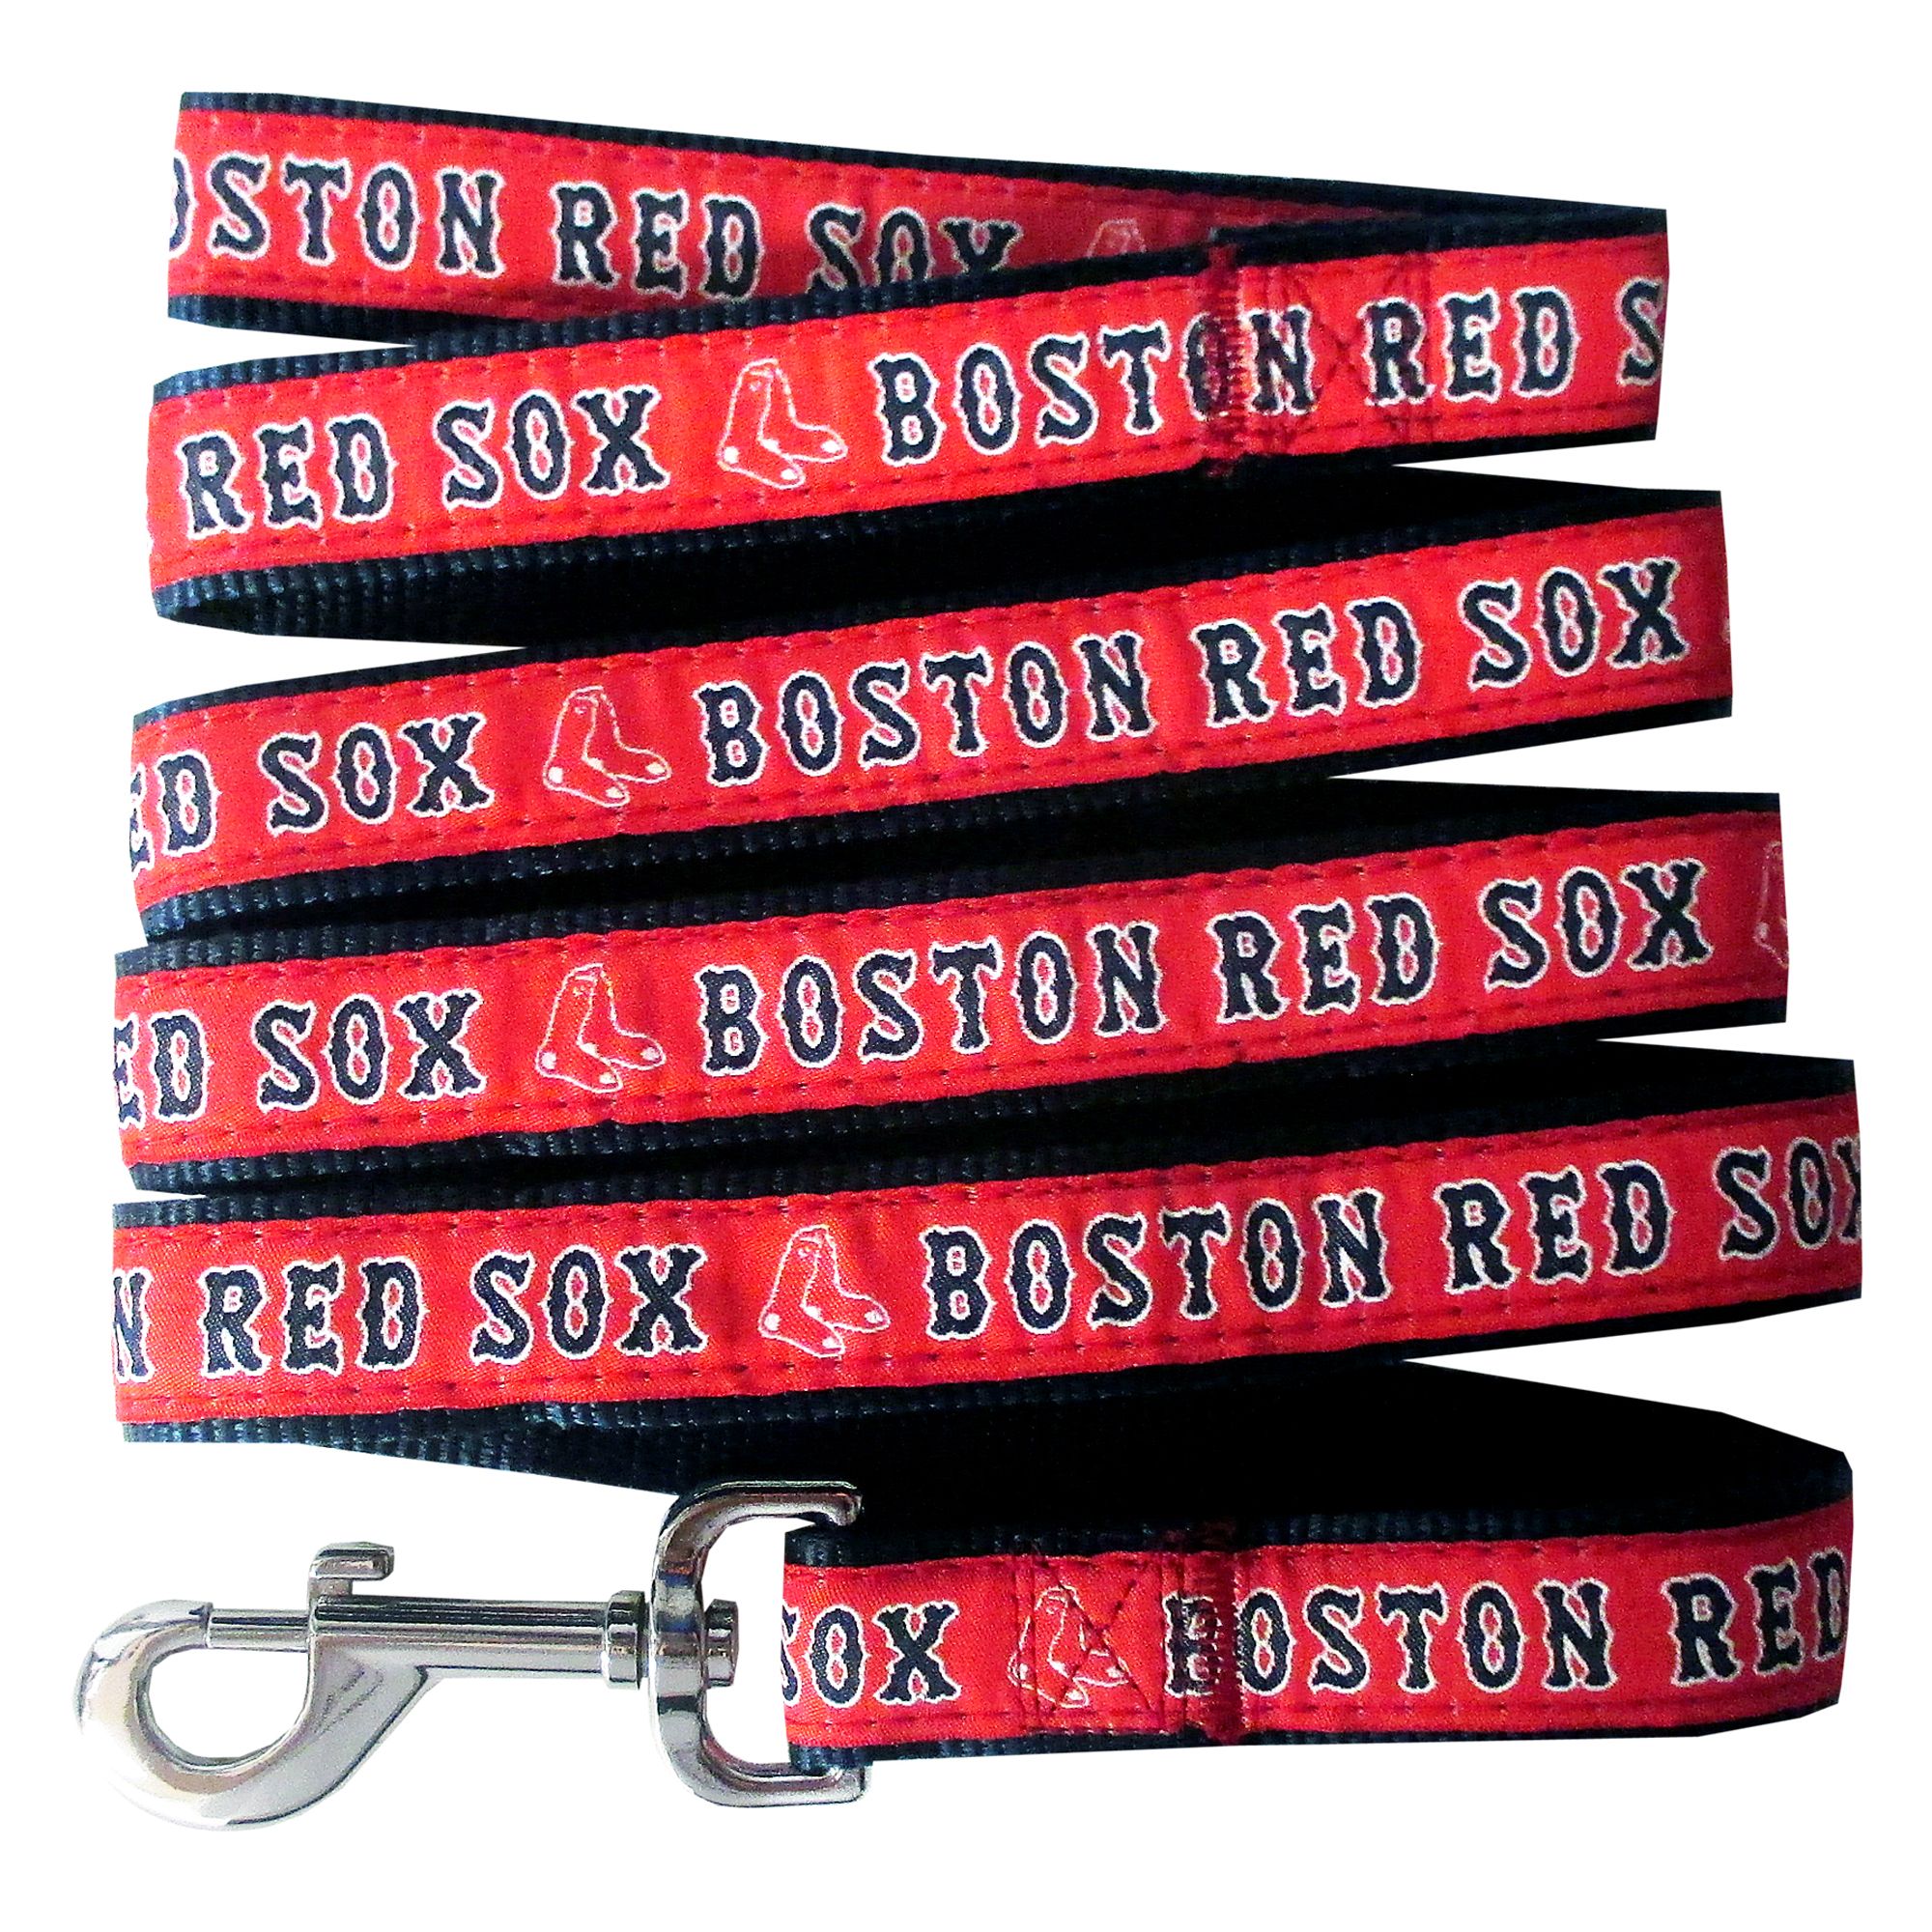 red sox dog sweater